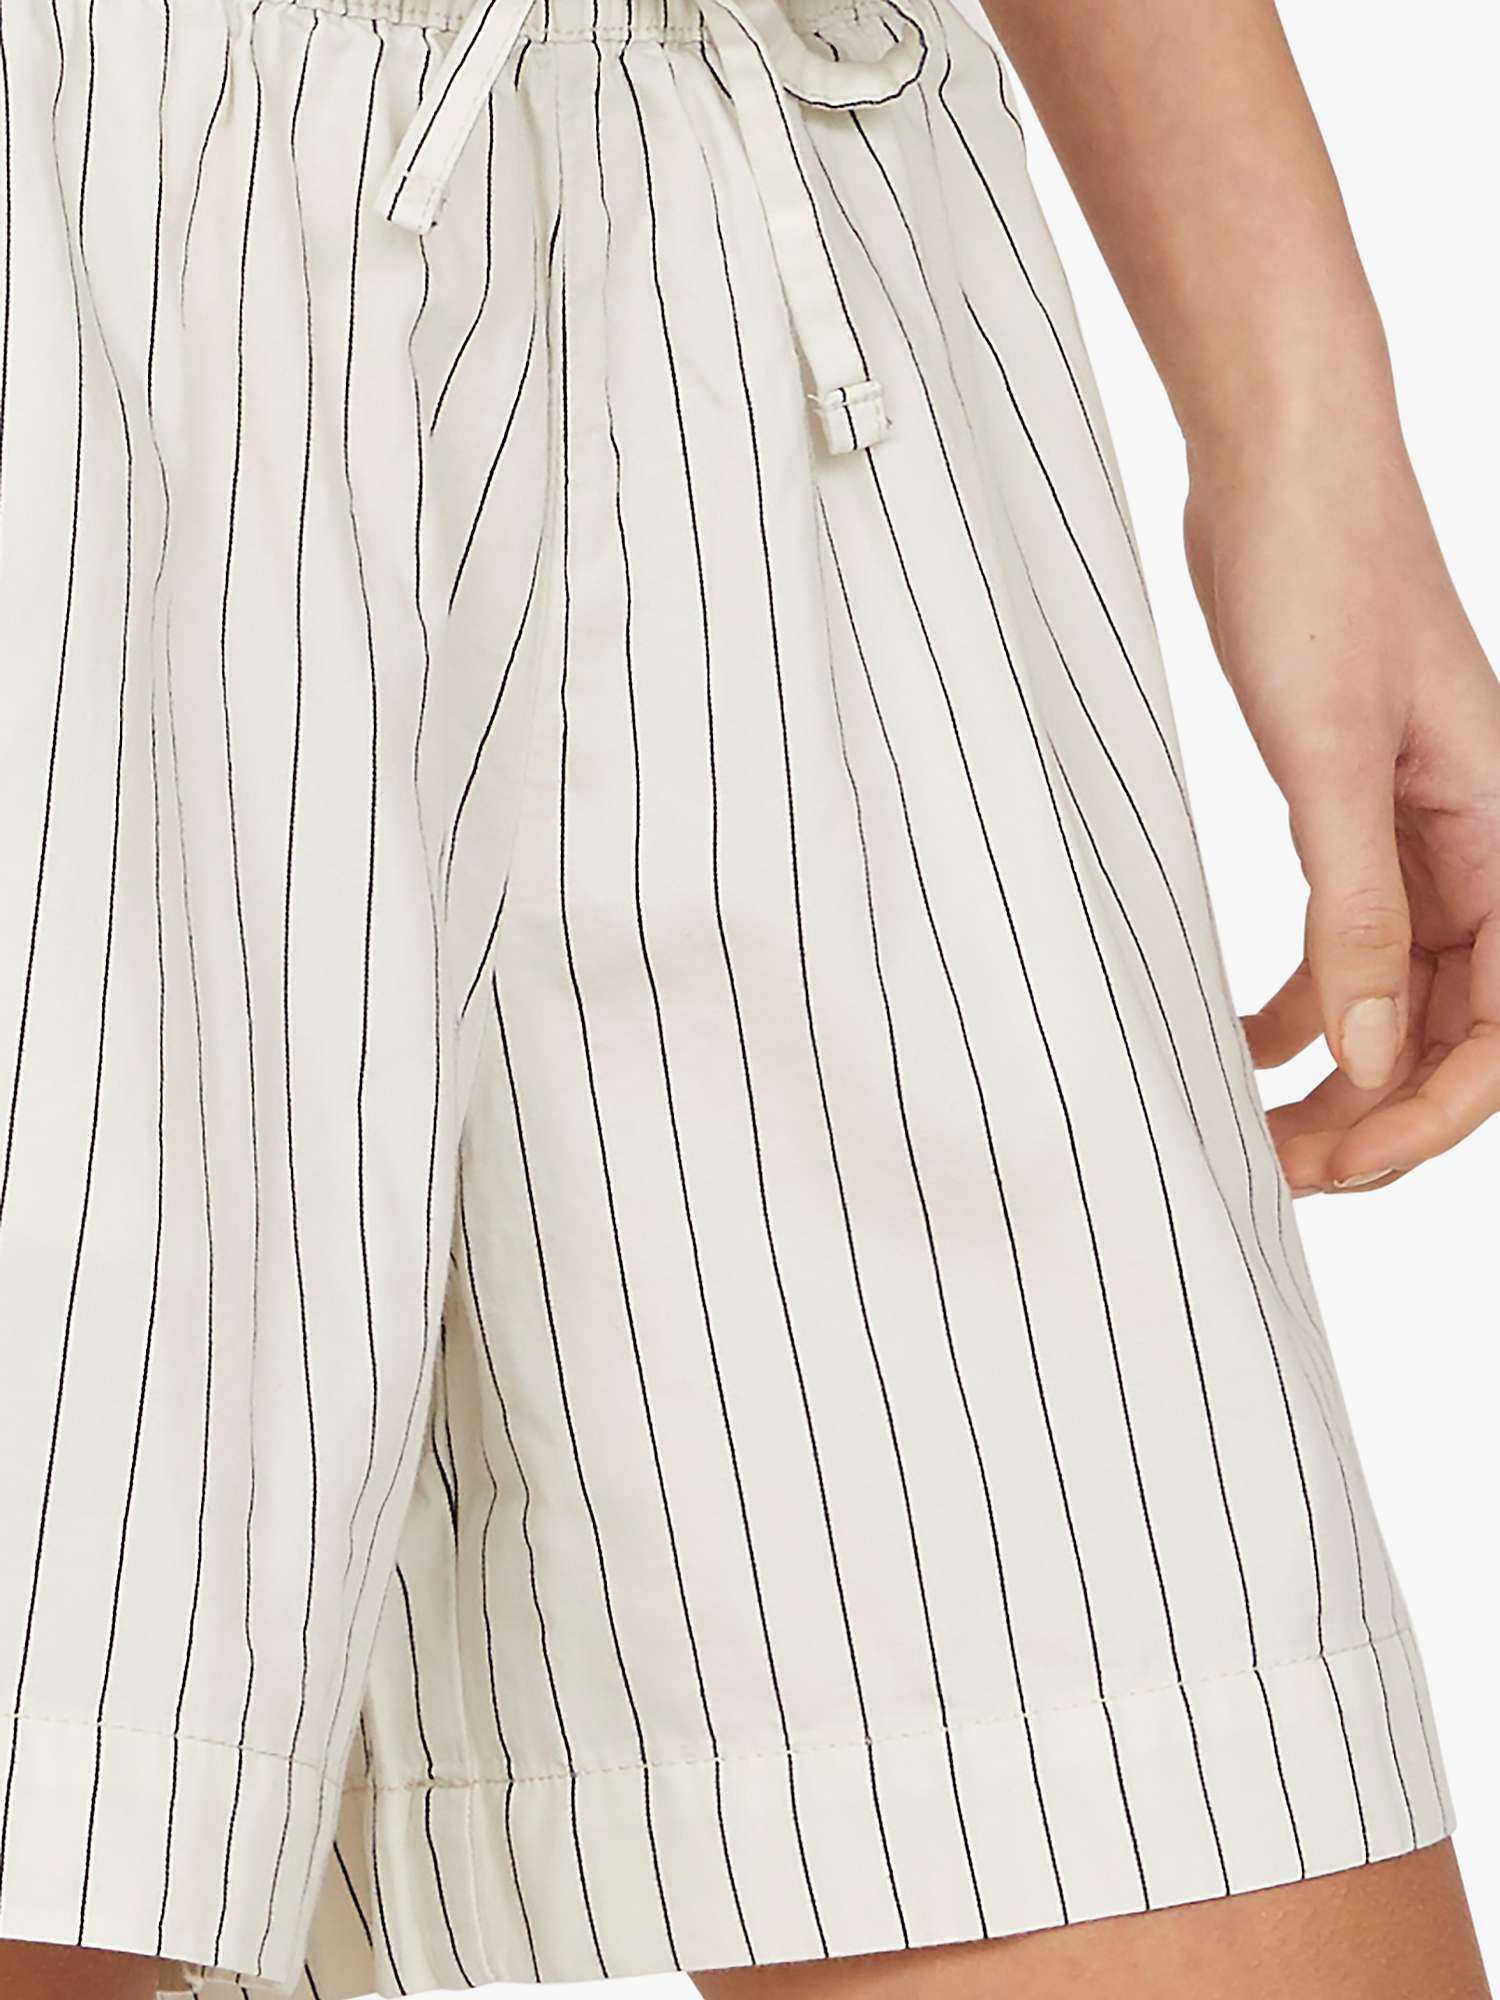 Buy Sisters Point Ella Loose Fitted Striped Shorts, Cream/Navy Online at johnlewis.com